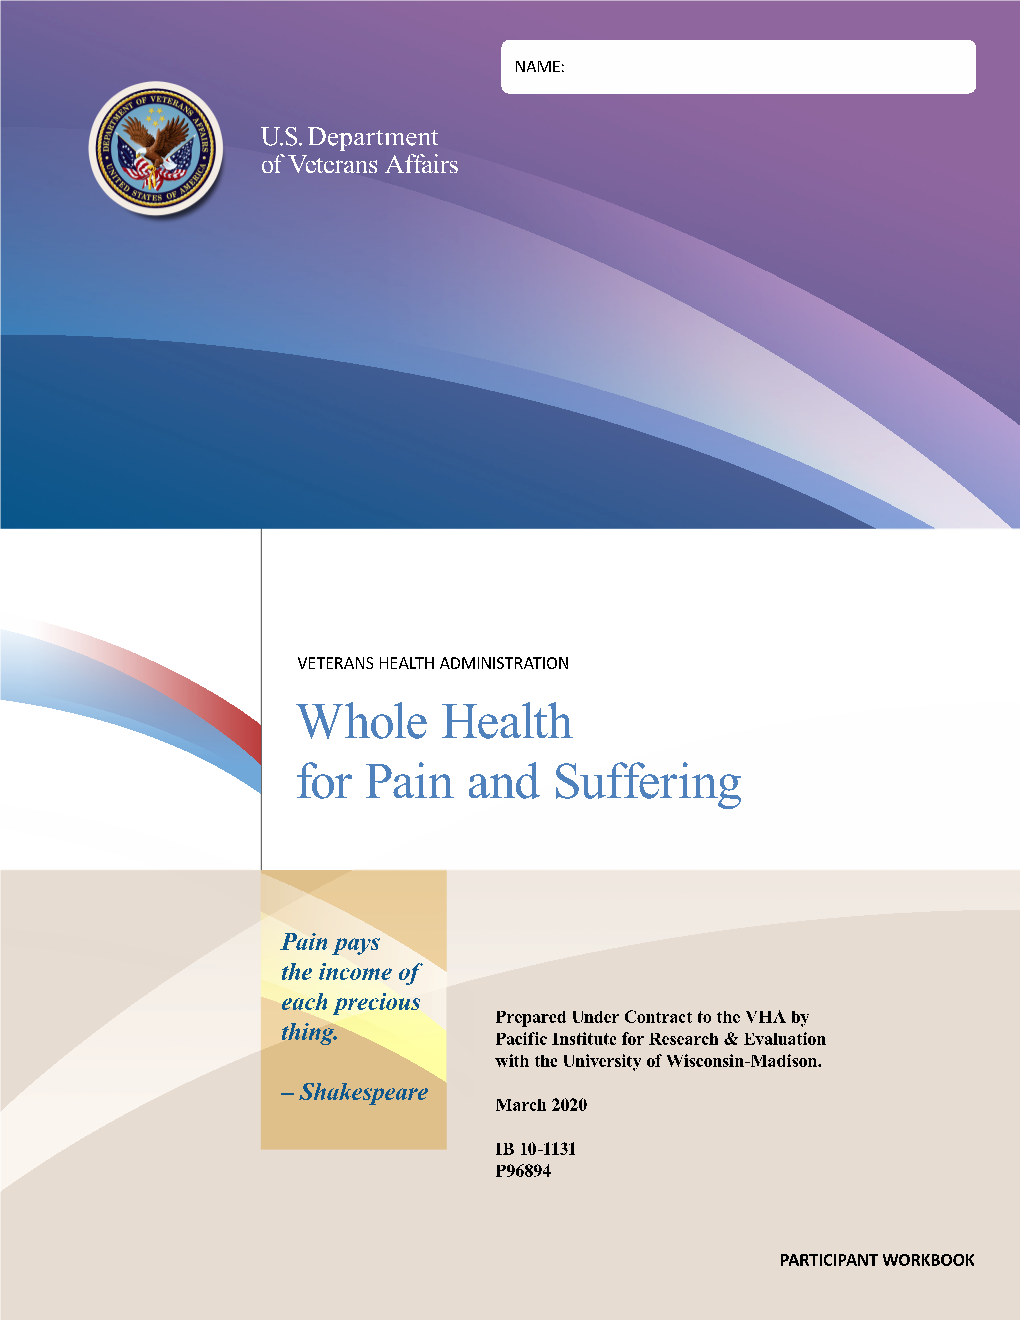 Whole Health for Pain and Suffering Workbook